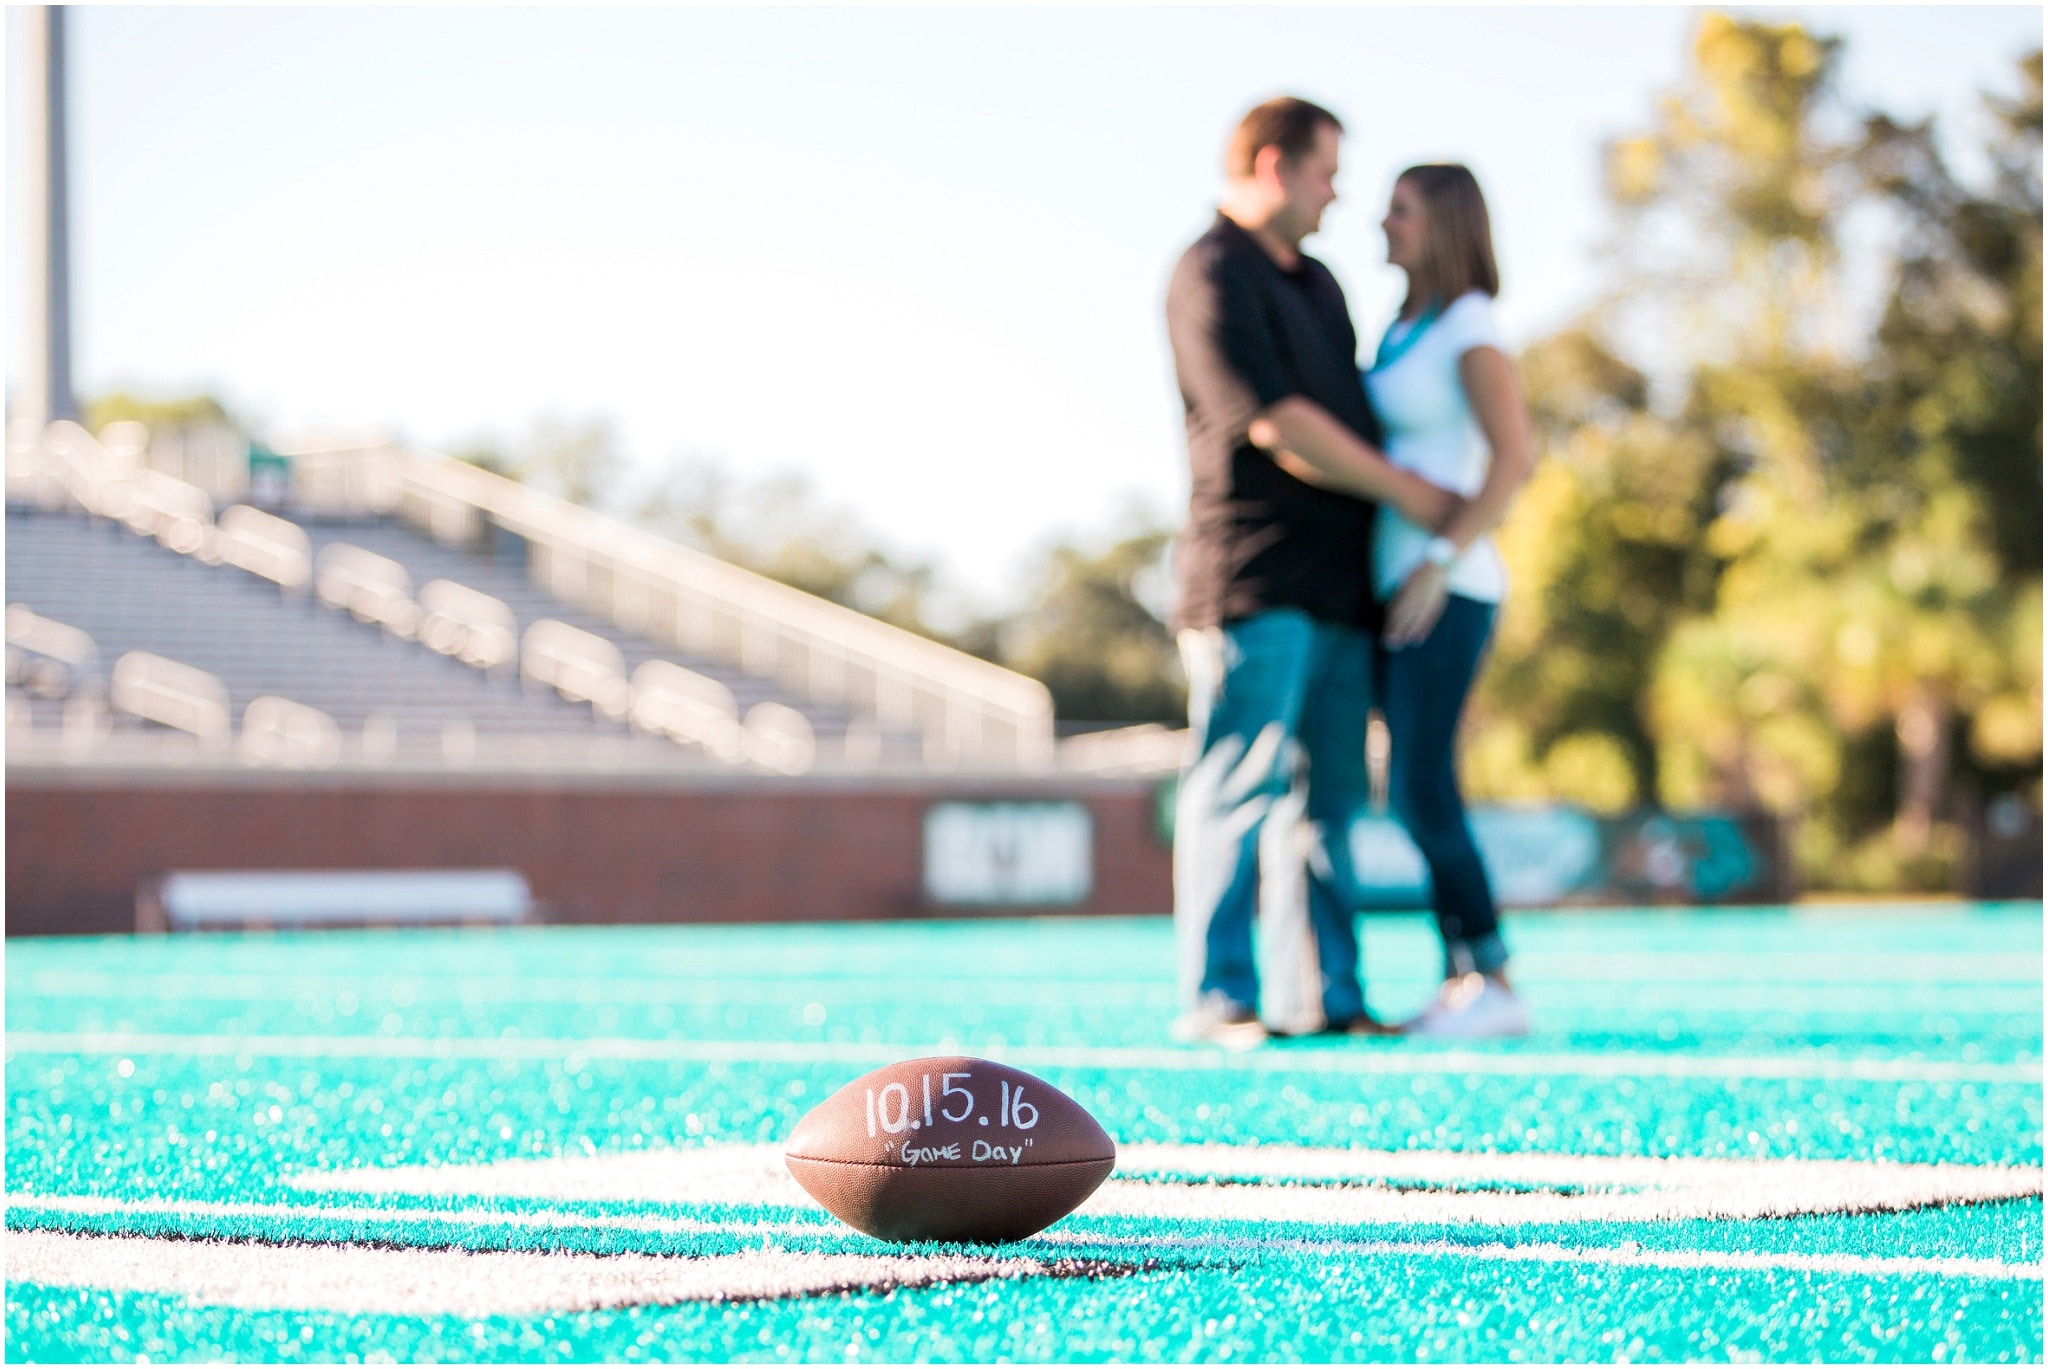 Engagement photography on a football field, Save the Date Football in focus in the foreground, Dana and Bradley out of focus in the background, Myrtle Beach Engagement Photography Session 1, Coastal Carolina University, www.onelifephoto.net